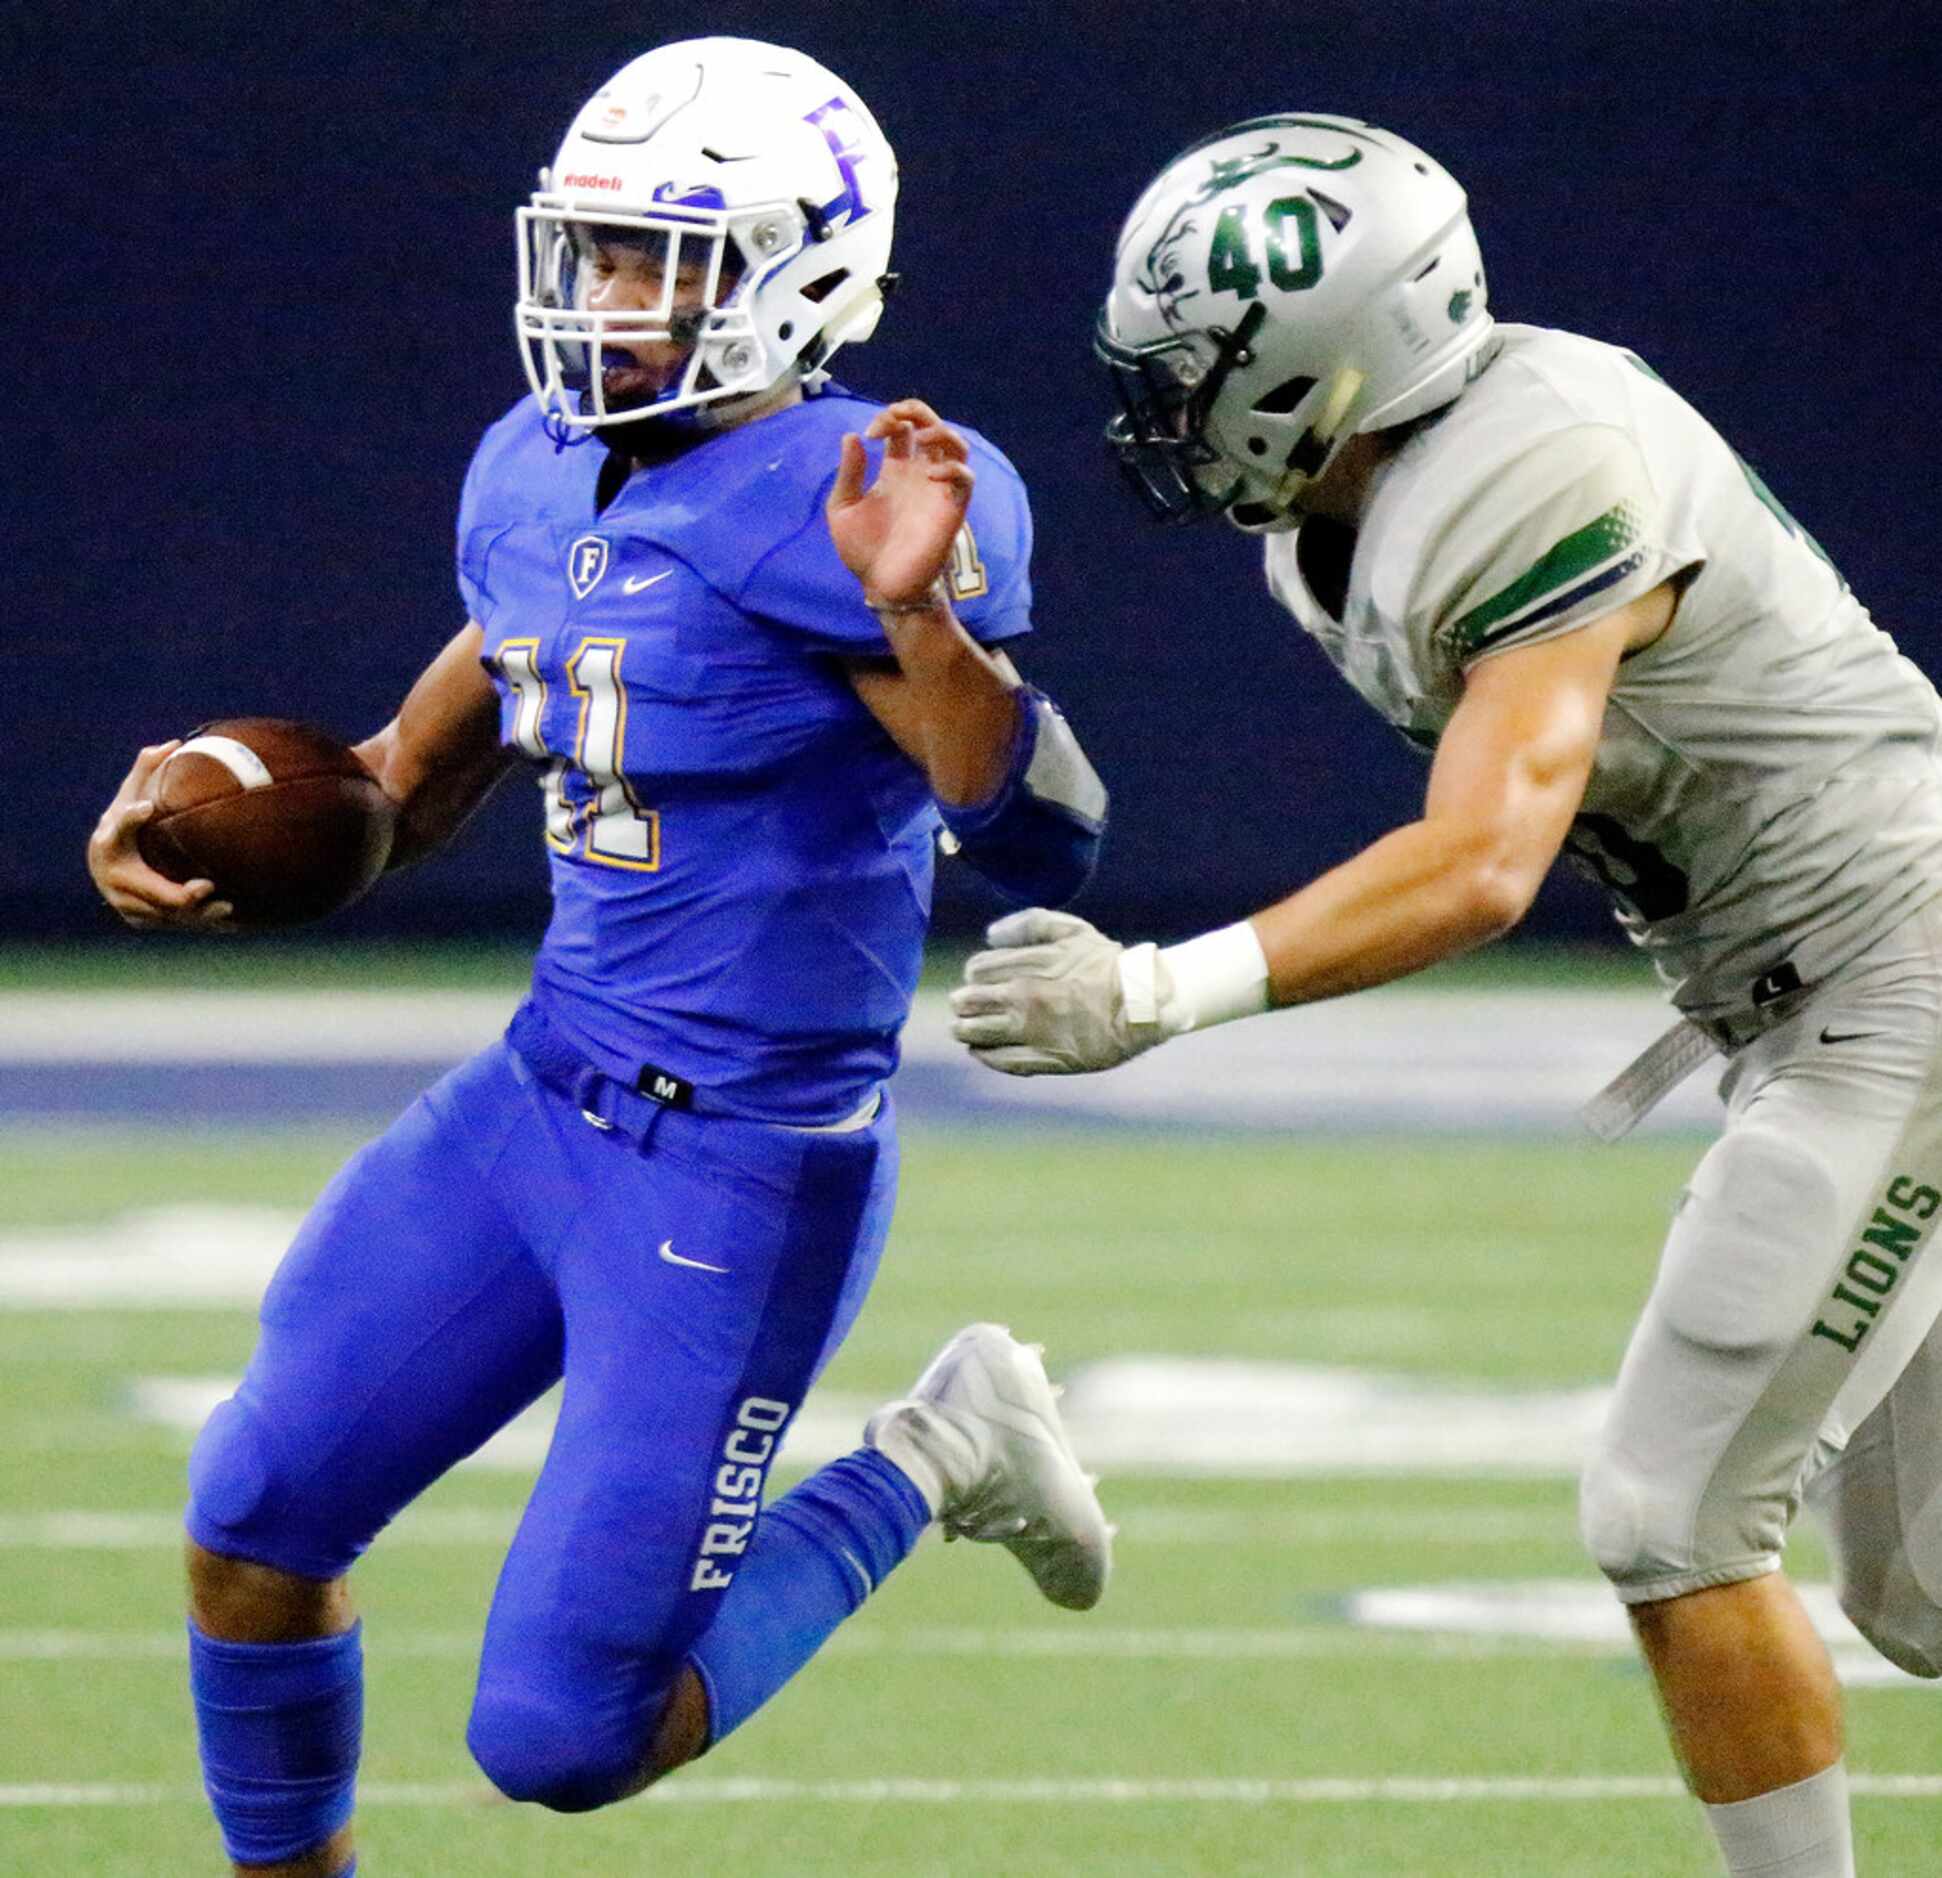 Frisco High School running back Donta Reece (11) is run out of bounds by Reedy High School...